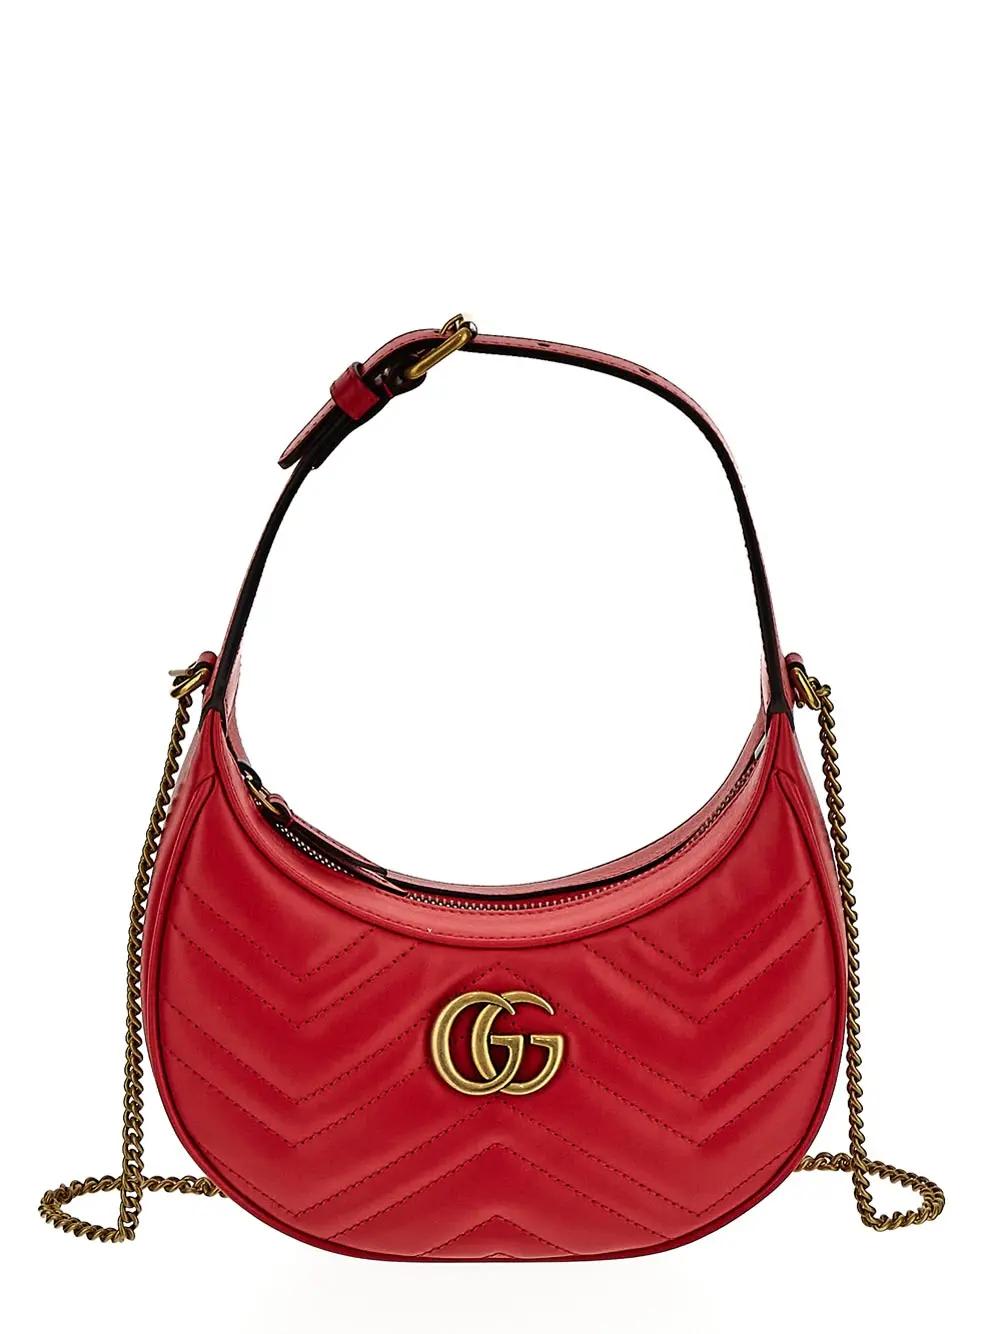 Red Quilted Leather 'GG' Half Moon Bag